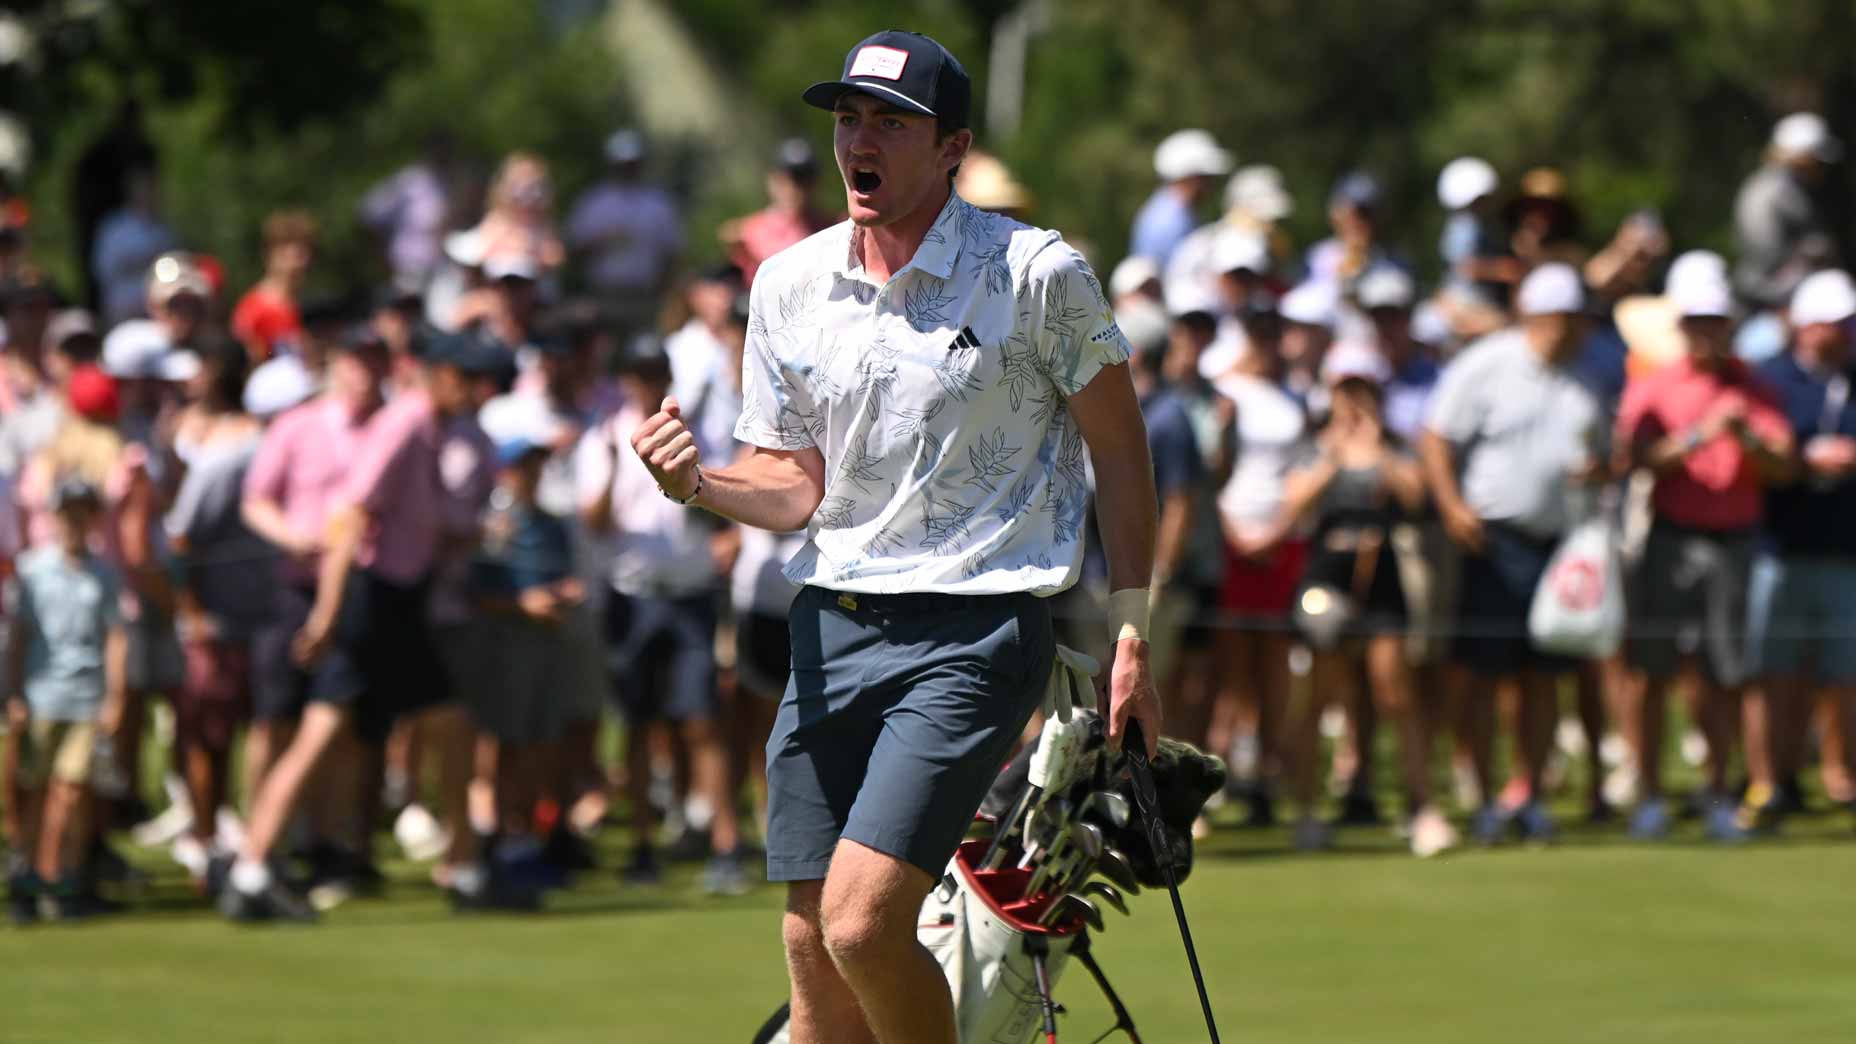 Nick Dunlap reacts to making a long putt on hole 27 during the final match of the 2023 U.S. Amateur at Cherry Hills C.C. in Cherry Hills Village, Colo. on Sunday, Aug. 20, 2023.